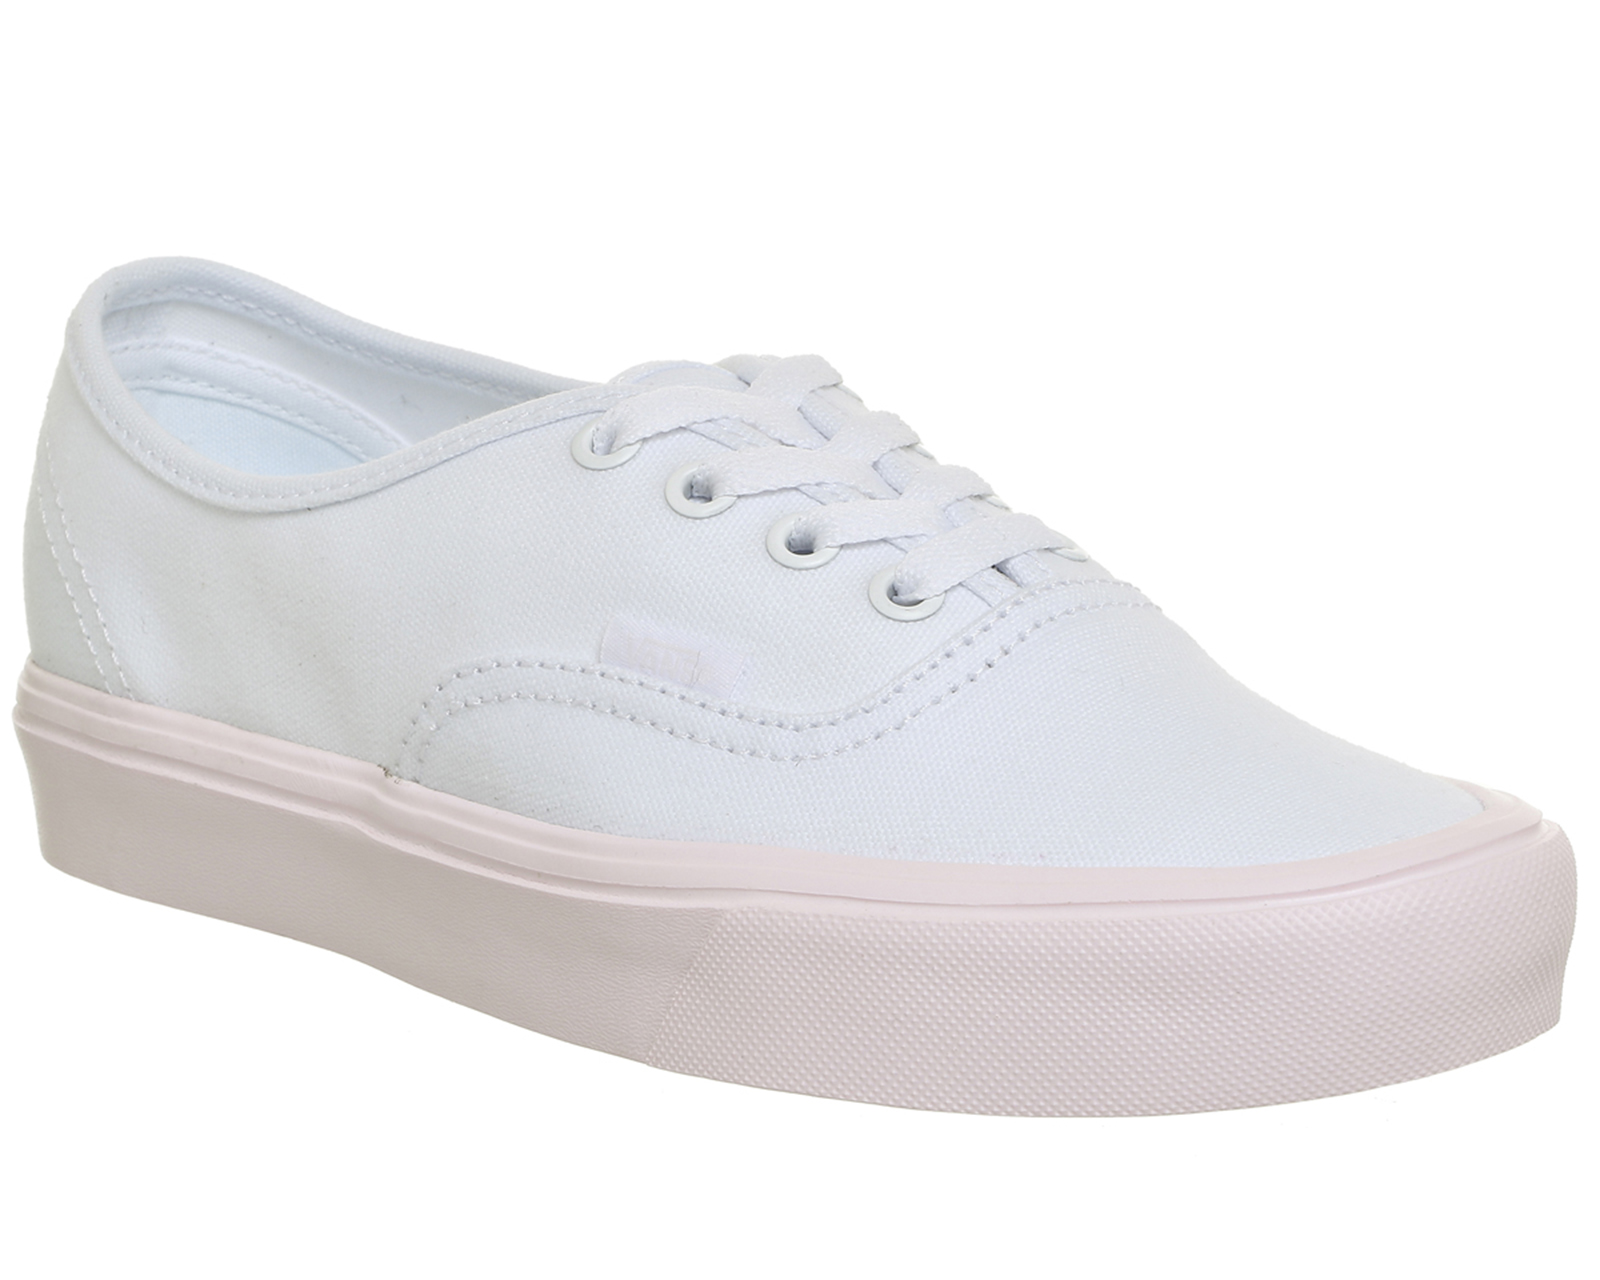 Vans Authentic Lite White Pink - Hers trainers